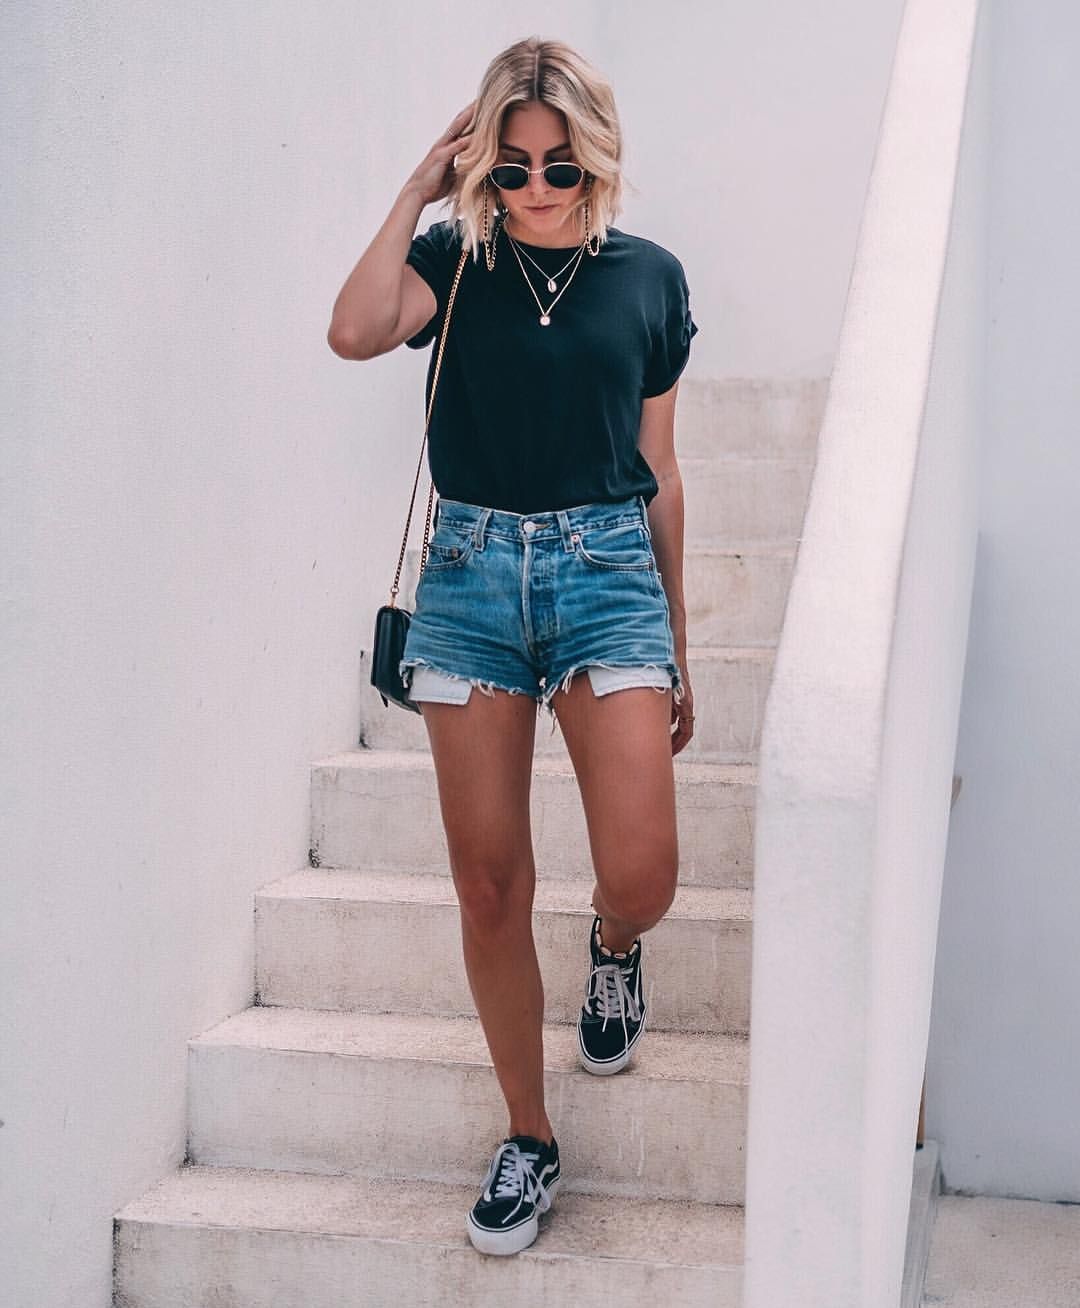 Denim shorts, basic tee & sneakers. Summer outfit done. #minimalstyle